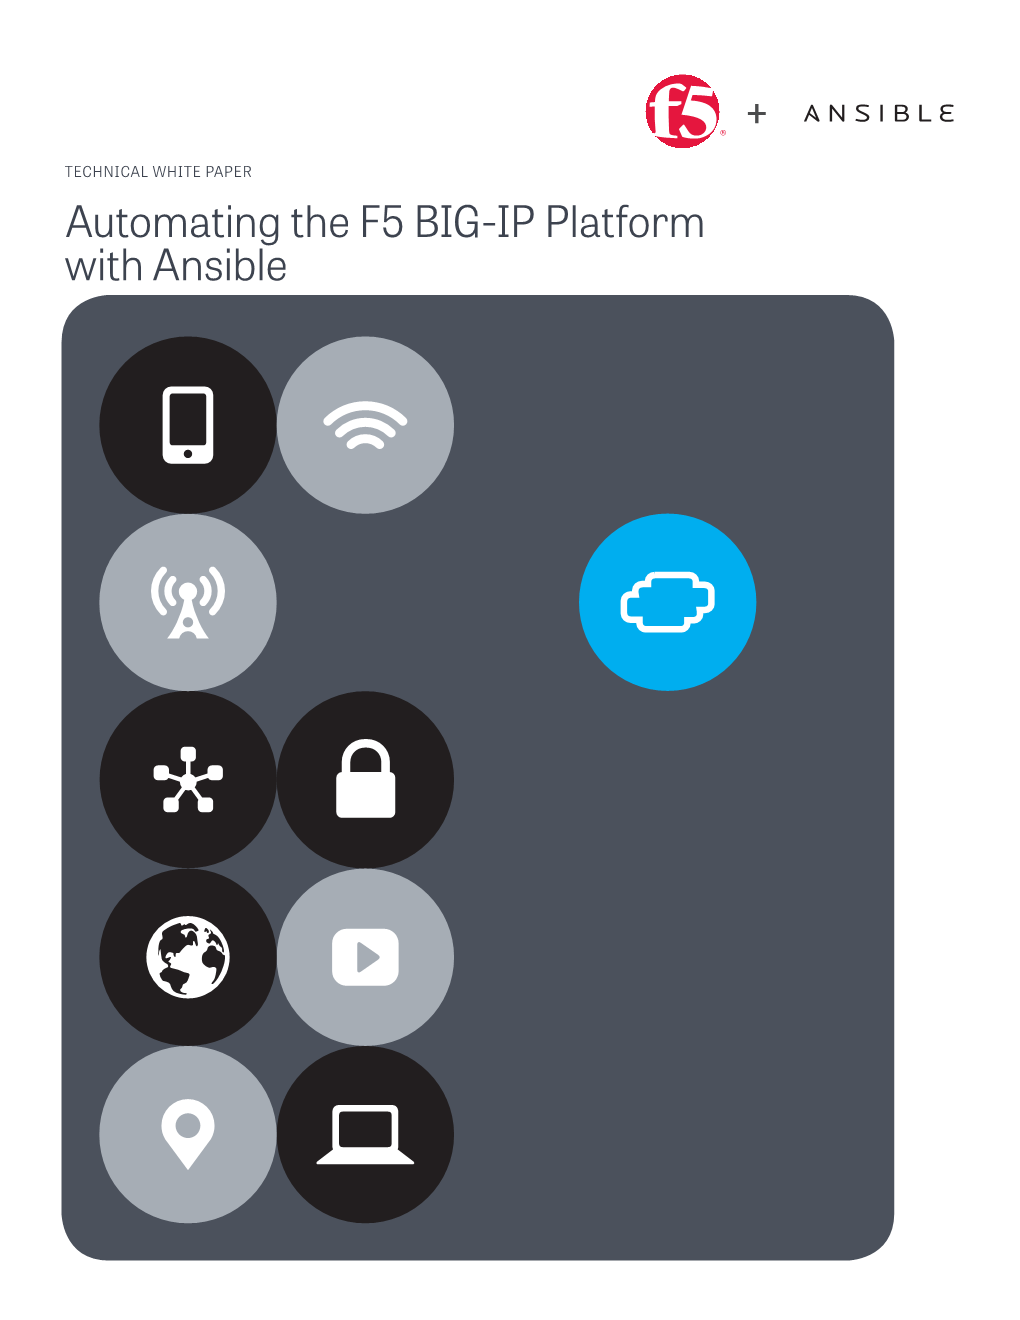 Automating the F5 BIG-IP Platform with Ansible | F5 Technical White